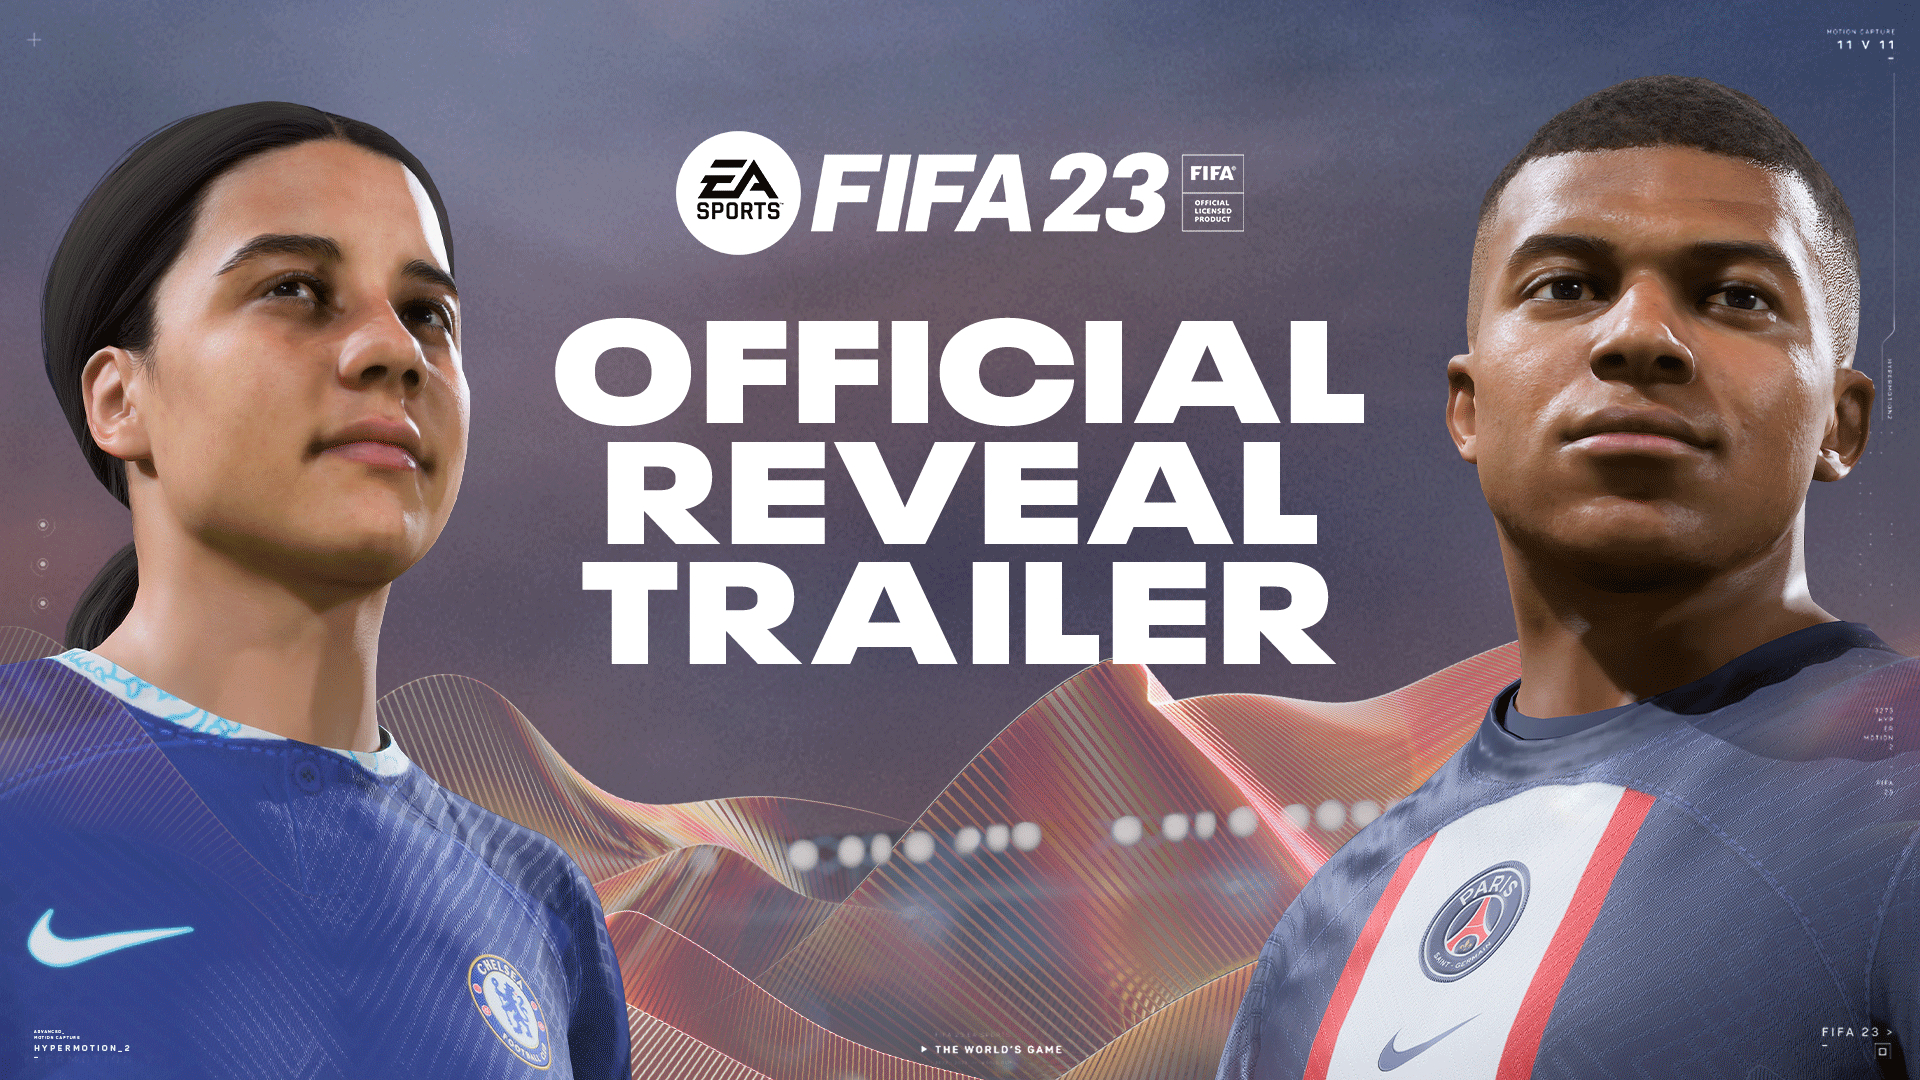 EA SPORTS™ FIFA 23 Celebrates The World's Game with HyperMotion2  Technology, Women's Club Football, and Two FIFA World Cups | Business Wire